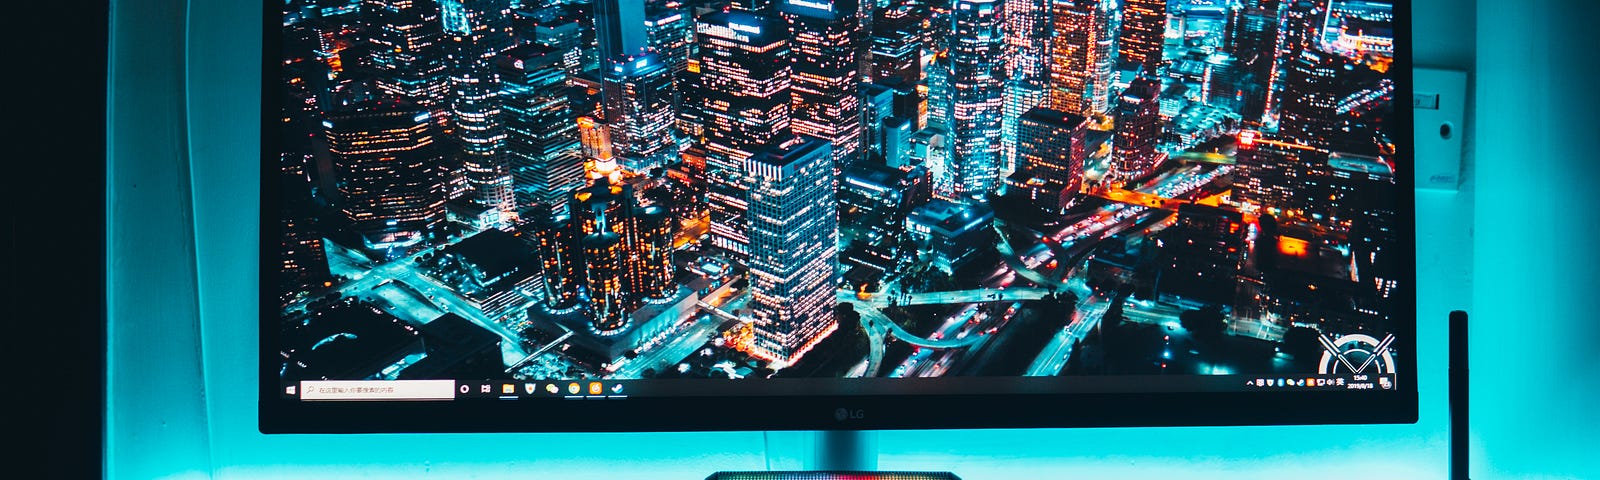 A computer screen showing a city at night